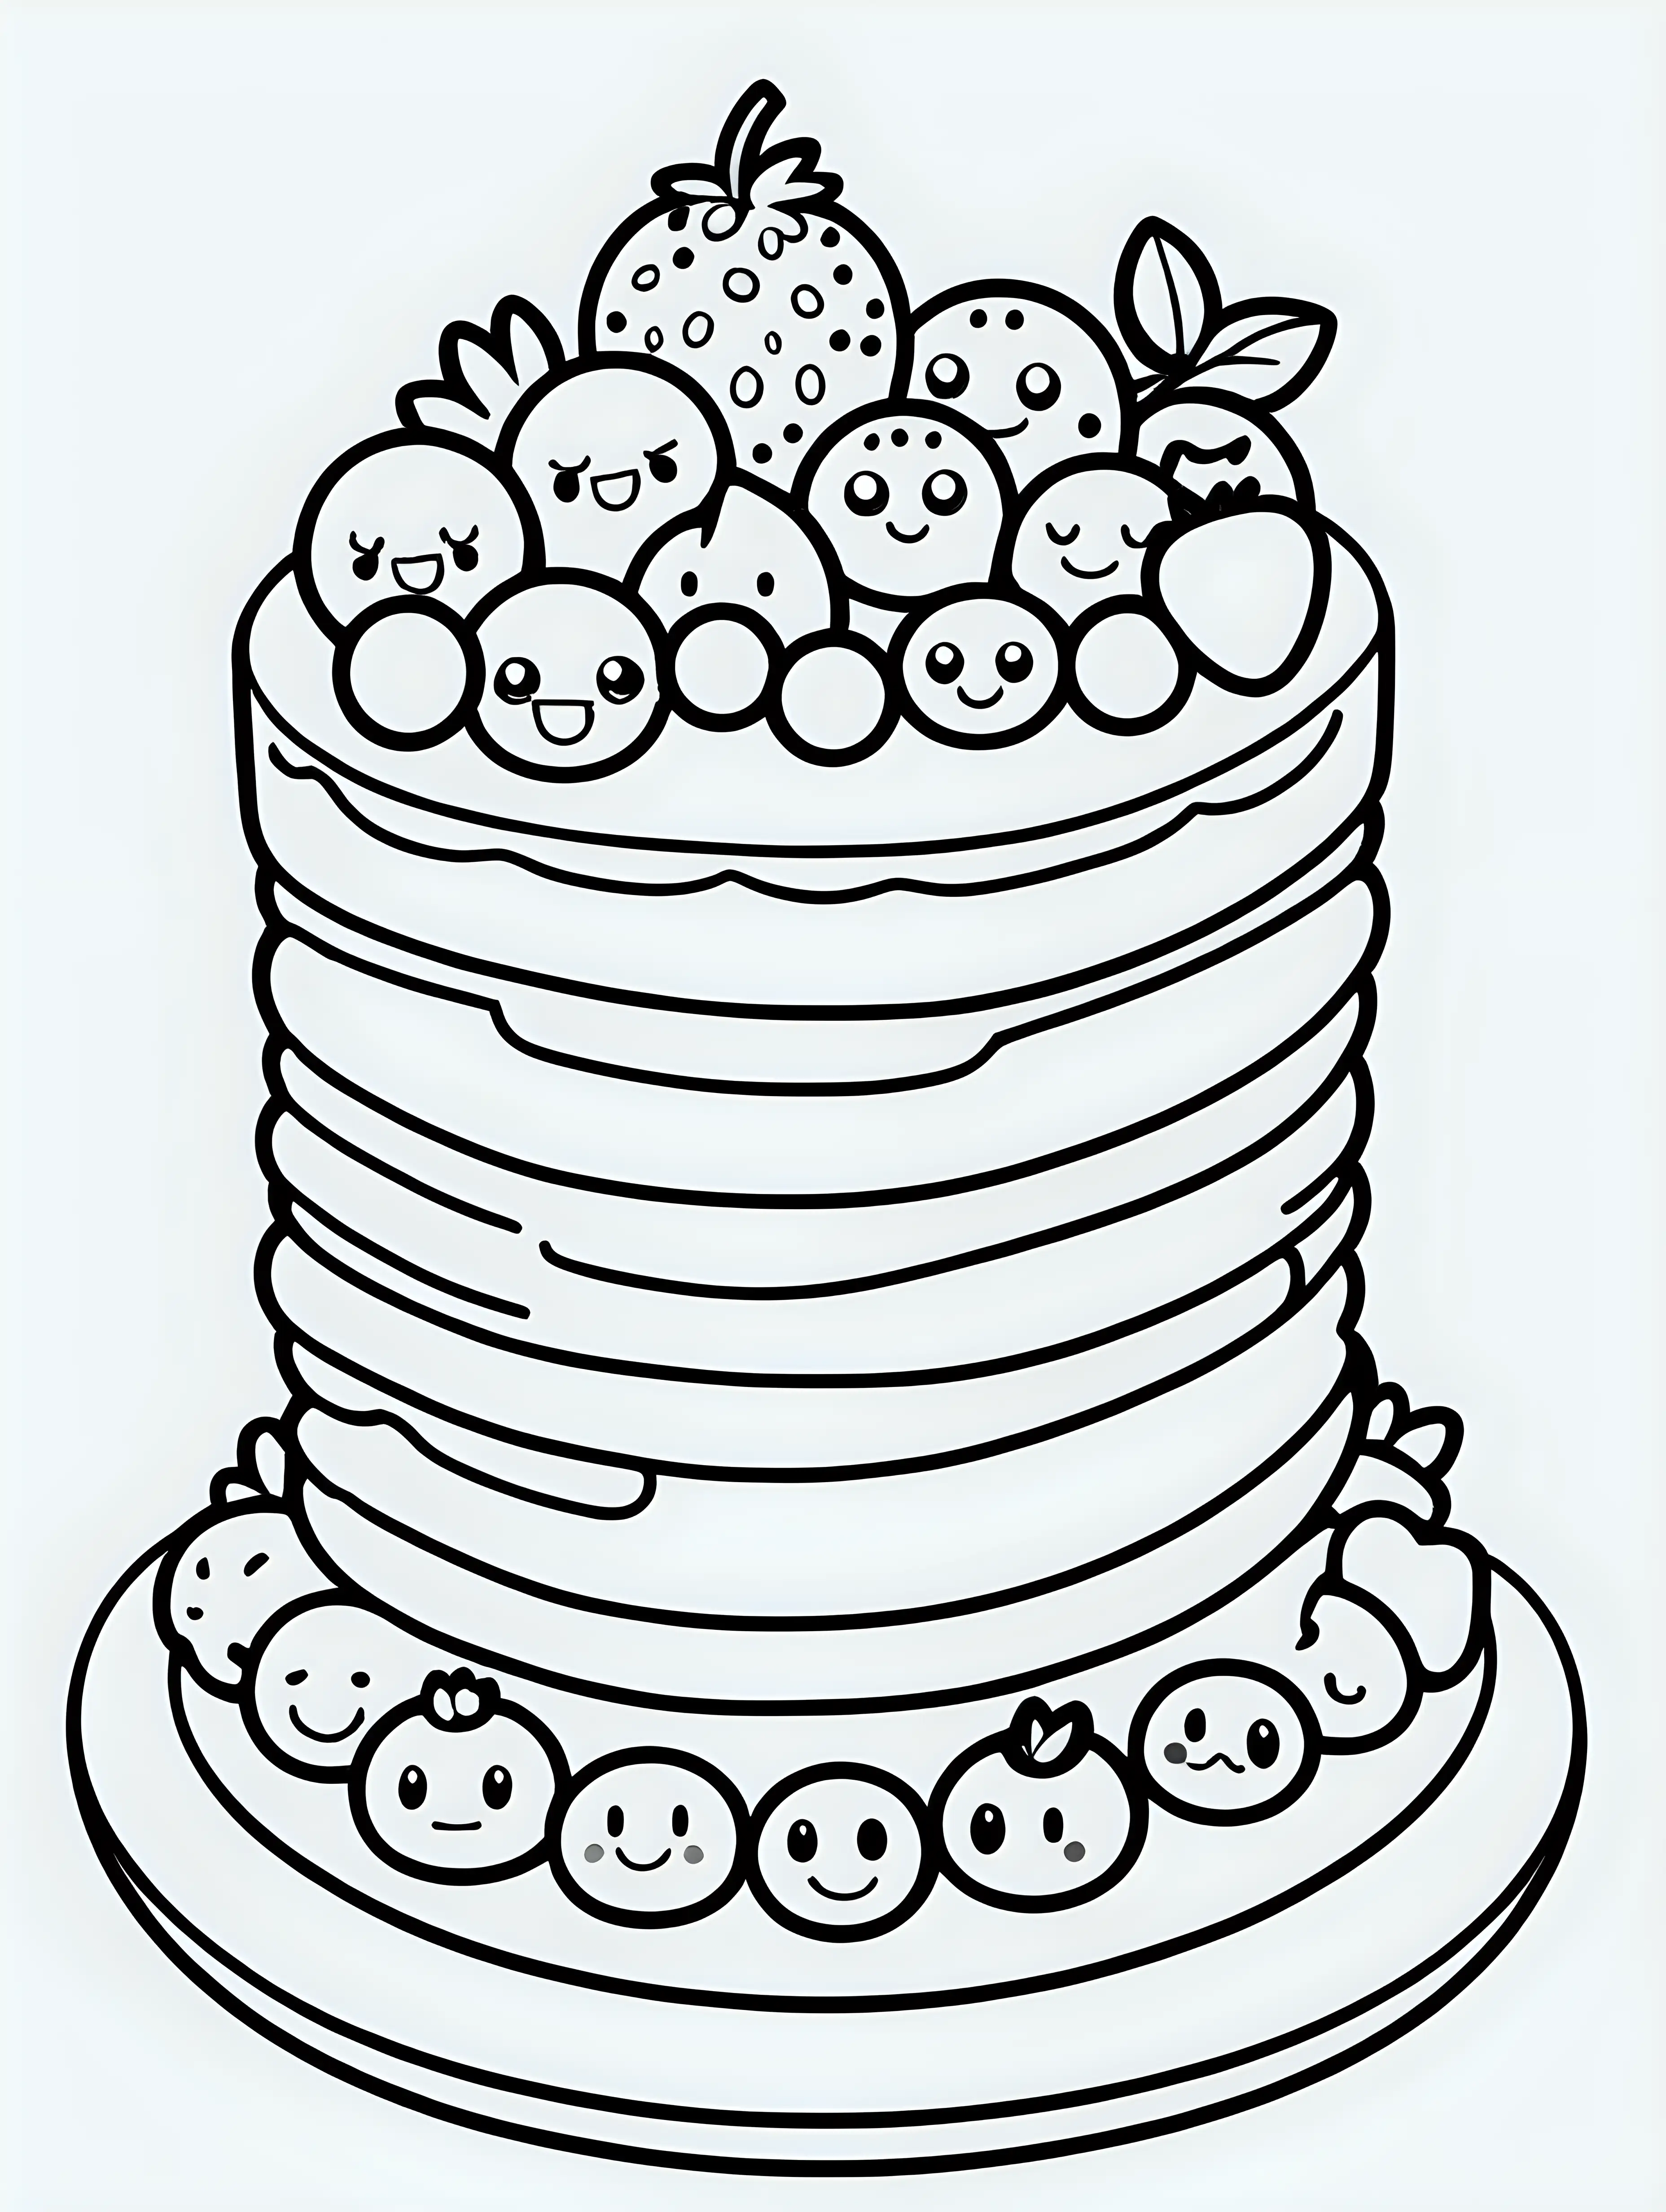 Adorable Cartoon Berry Cake Coloring Page on a Clean White Background